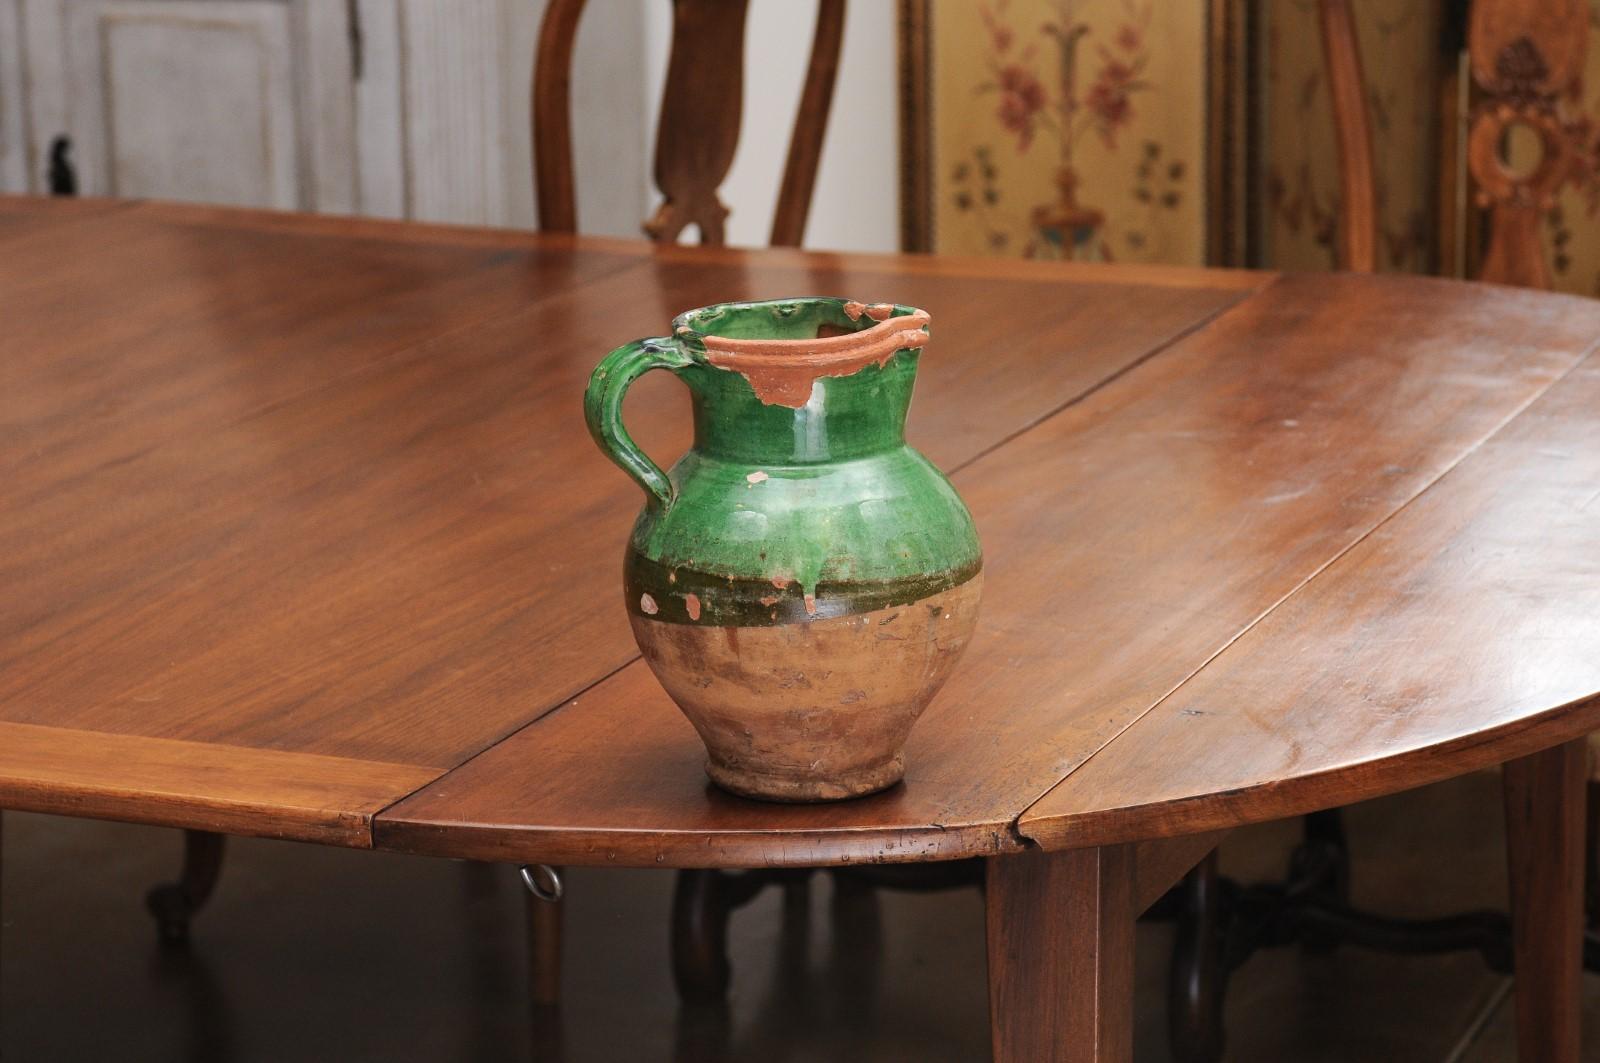 A French Provincial green glazed pottery pitcher from the 19th century, with large handle and nicely distressed patina. Created in southern France during the 19th century, this pitcher features a green glazed upper section contrasting beautifully